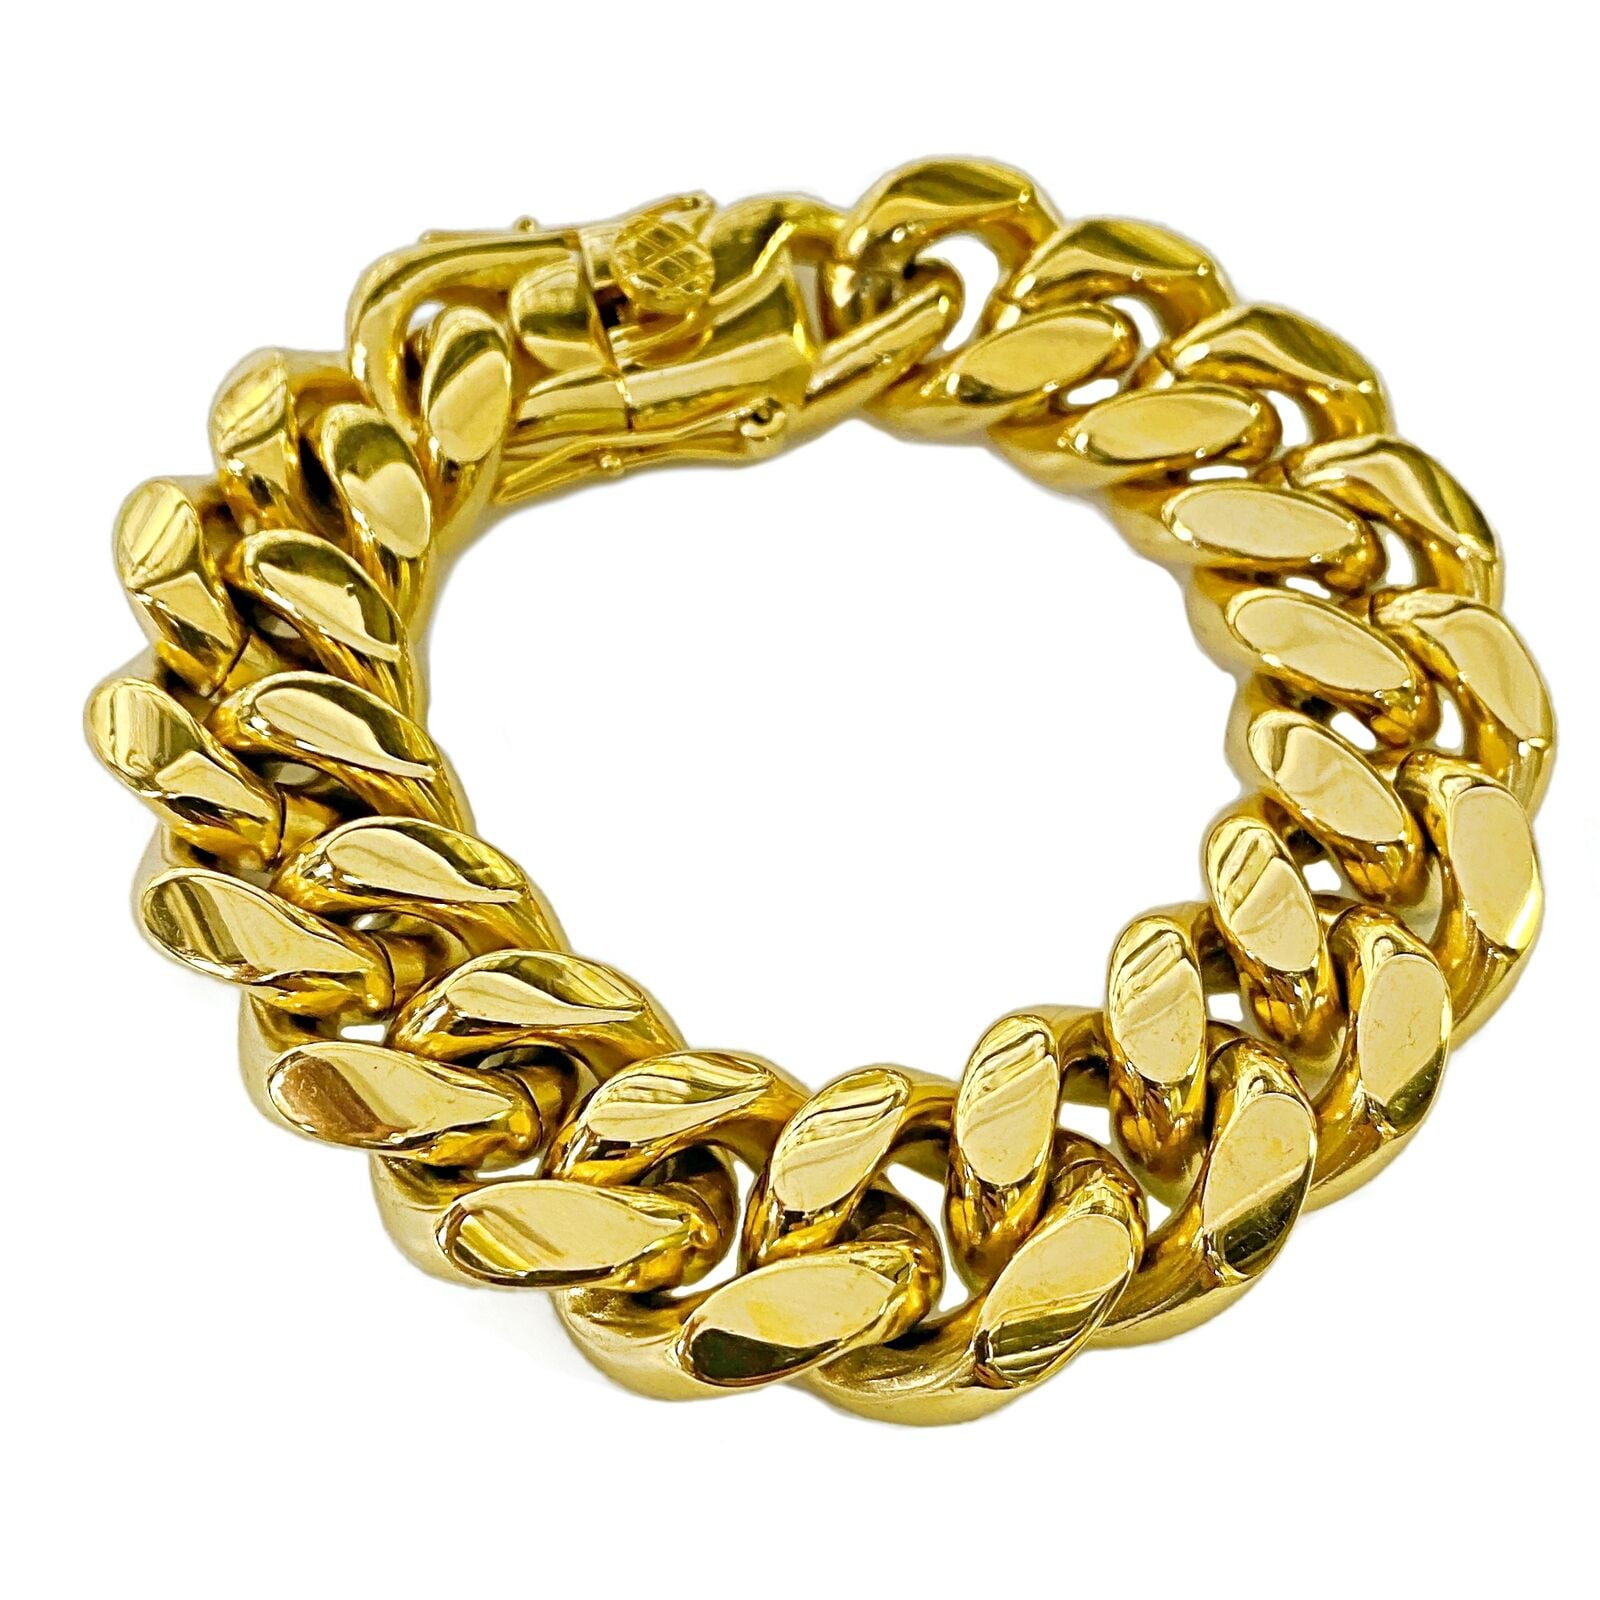 Big Boss Wrist Chain Link Bracelet Thick Wider 24K Yellow Gold Filled  Classic Fathers Gift Jewelry From Blingfashion, $20.31 | DHgate.Com